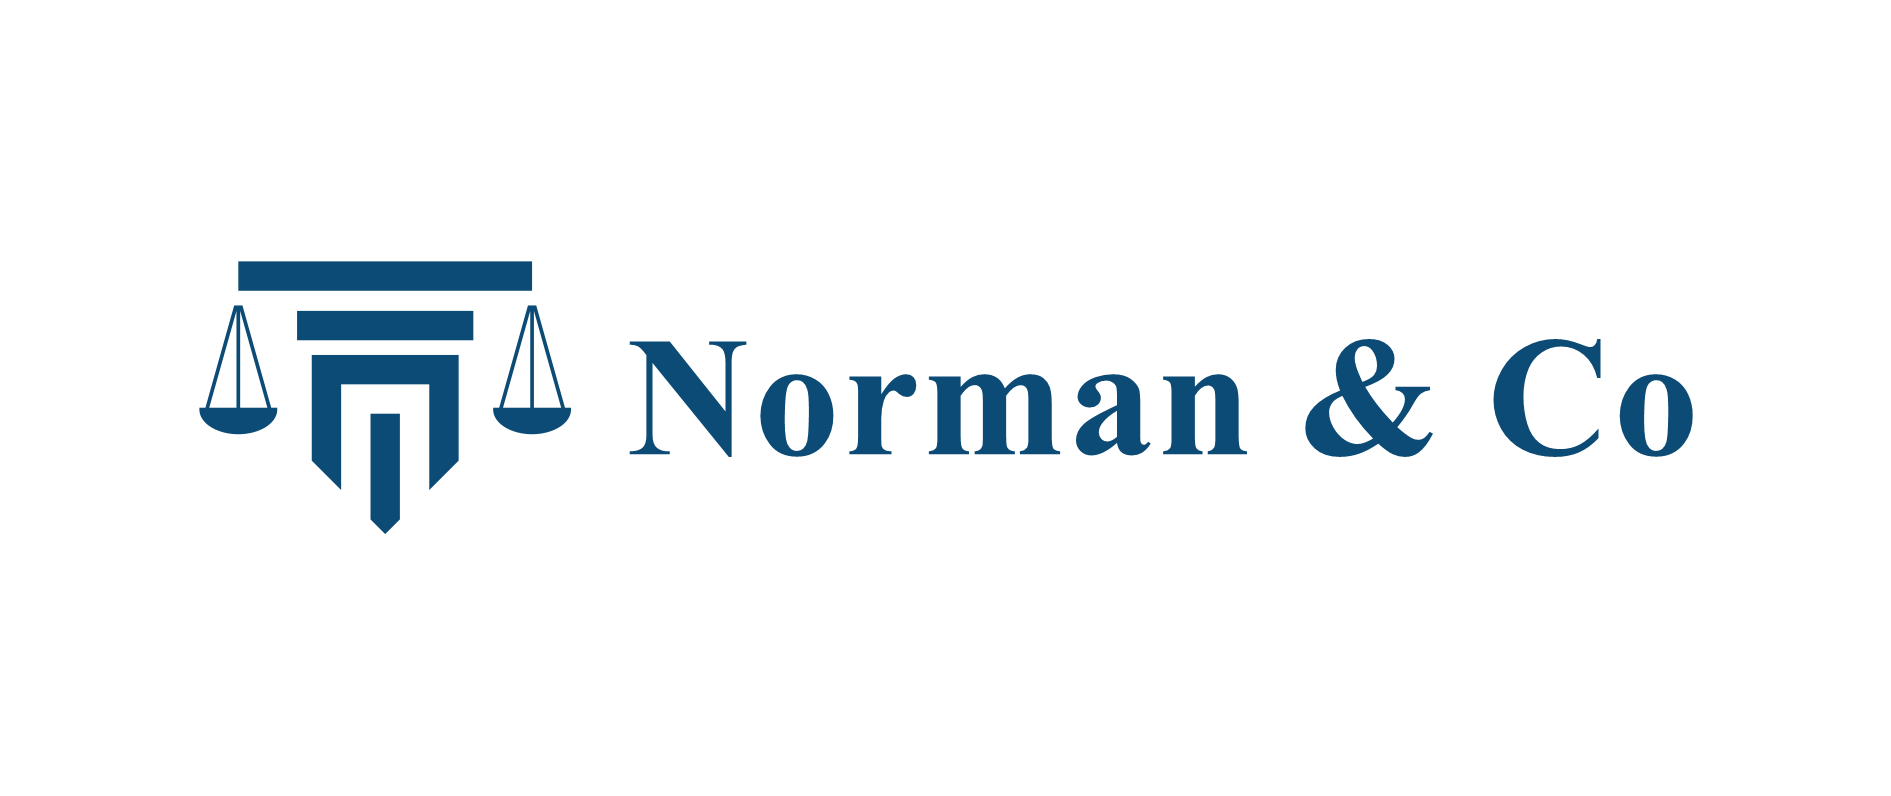 Norman & Co. Lawyers